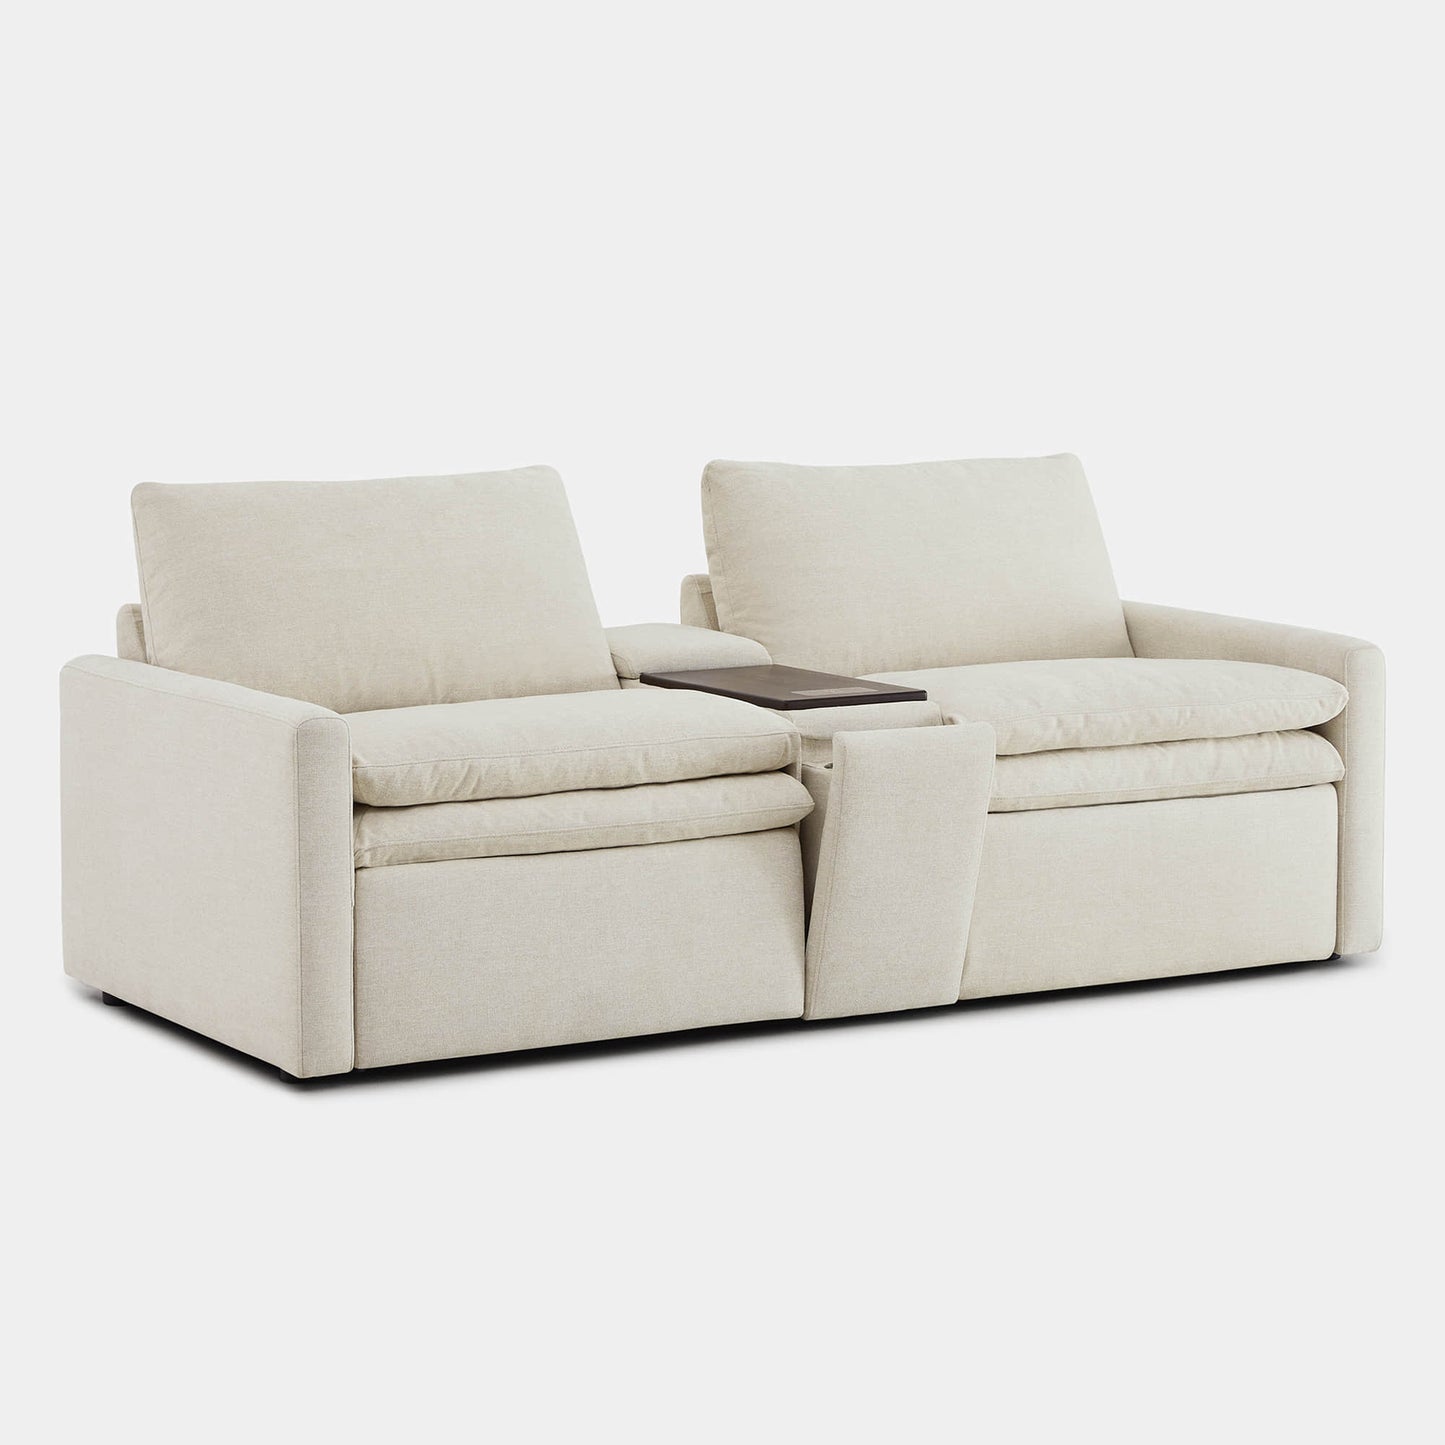 2 seater recliner couch